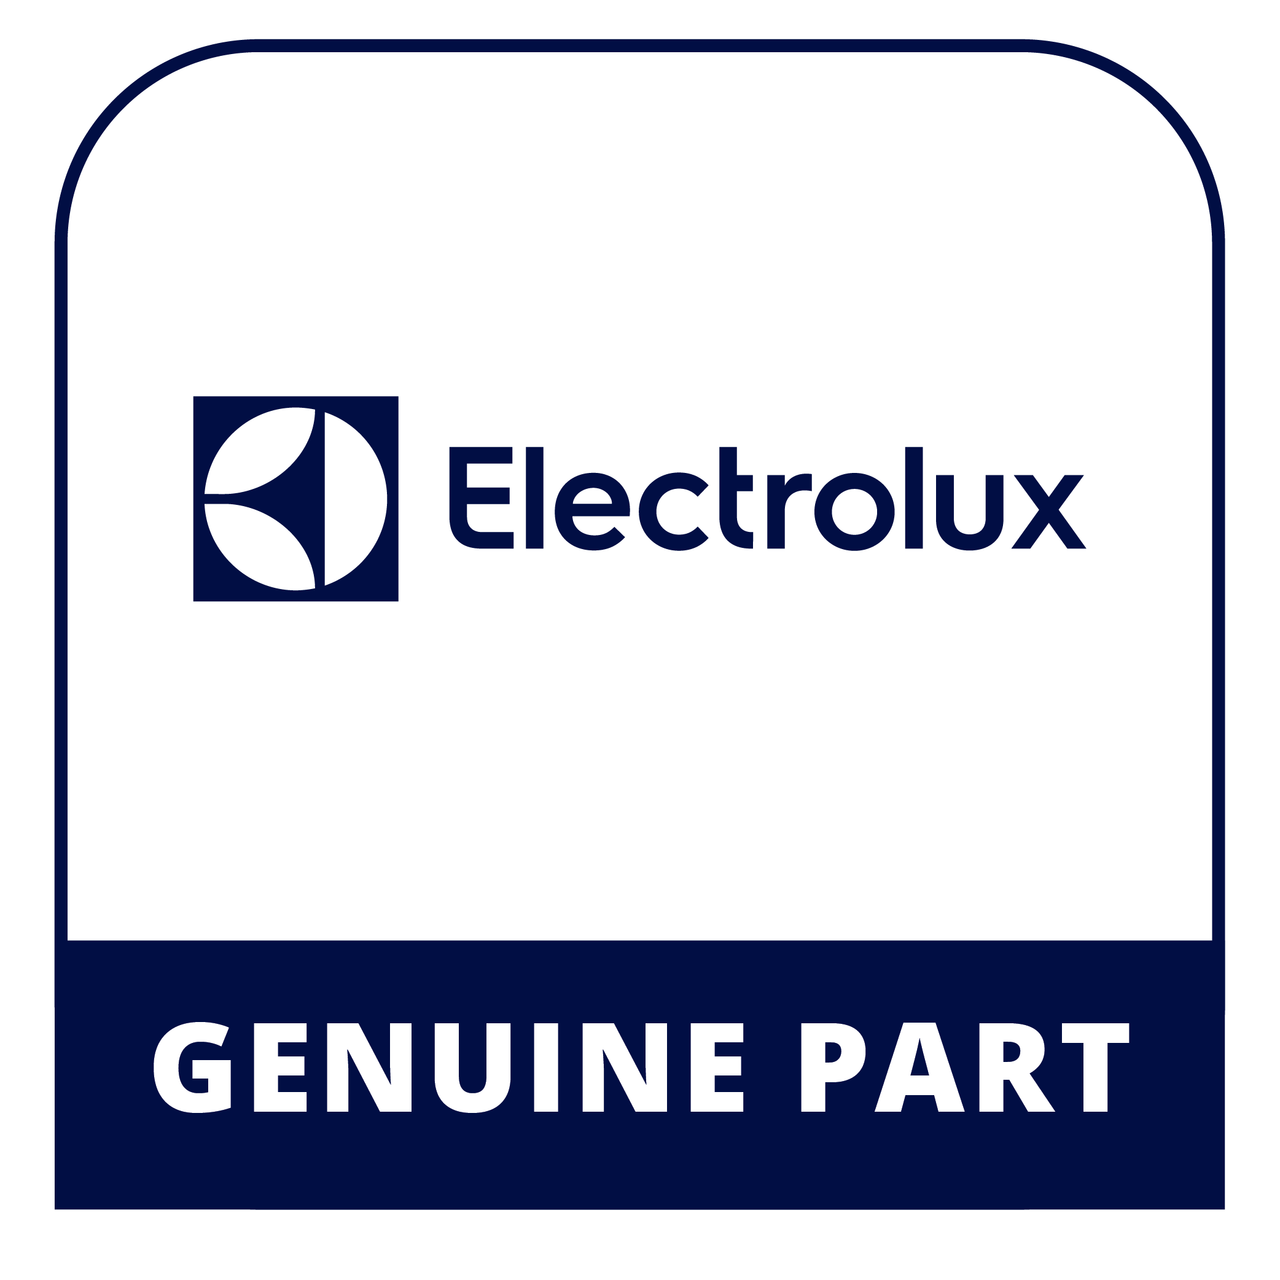 Frigidaire - Electrolux 316417203 Owners Manual - Genuine Electrolux Part